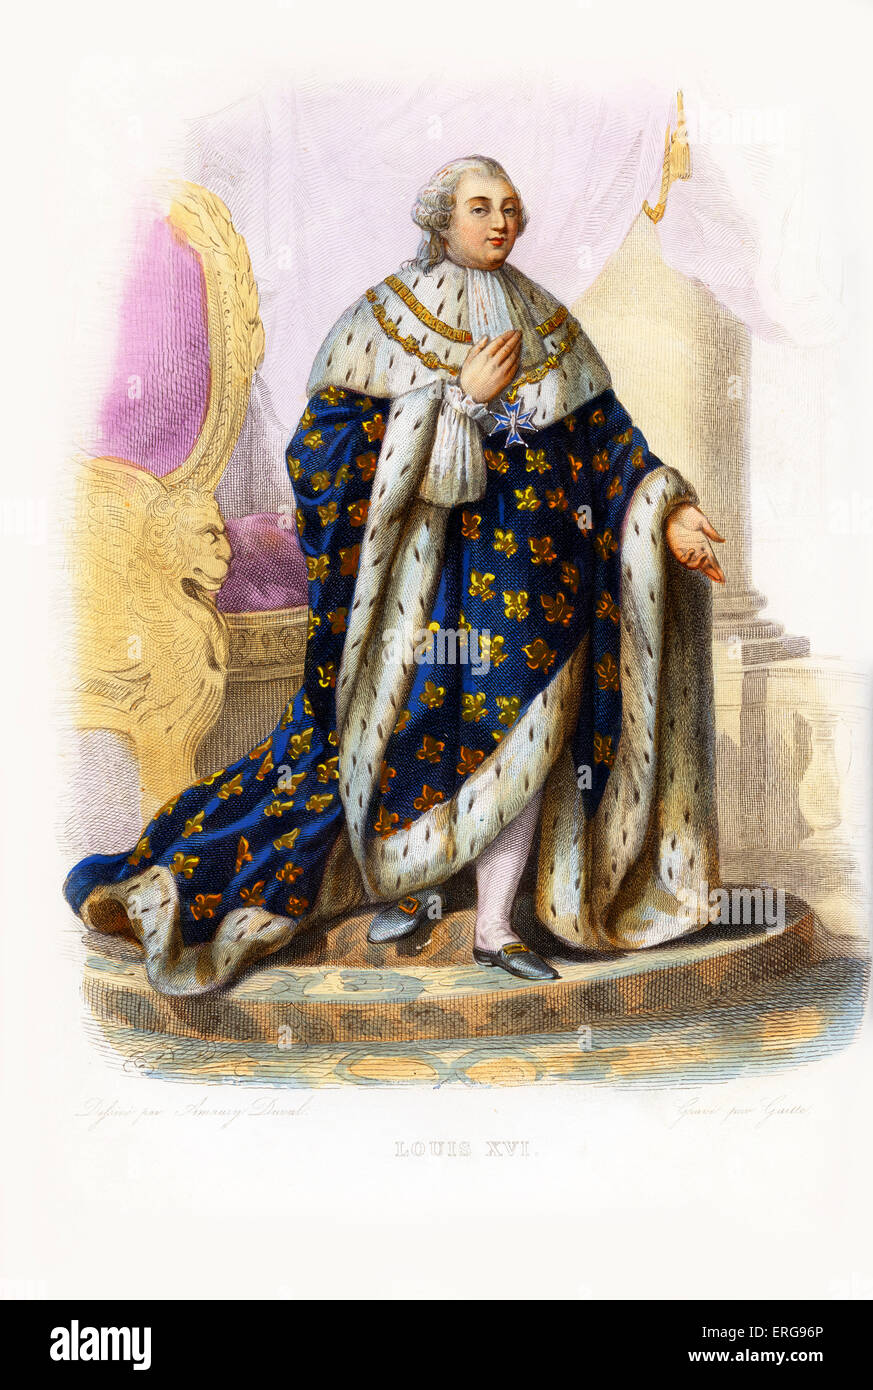 Louis XVI. King of France 1774-1792. Suspended and arrested during the French Revolution - executed by guillotine. 1754-1793. Stock Photo